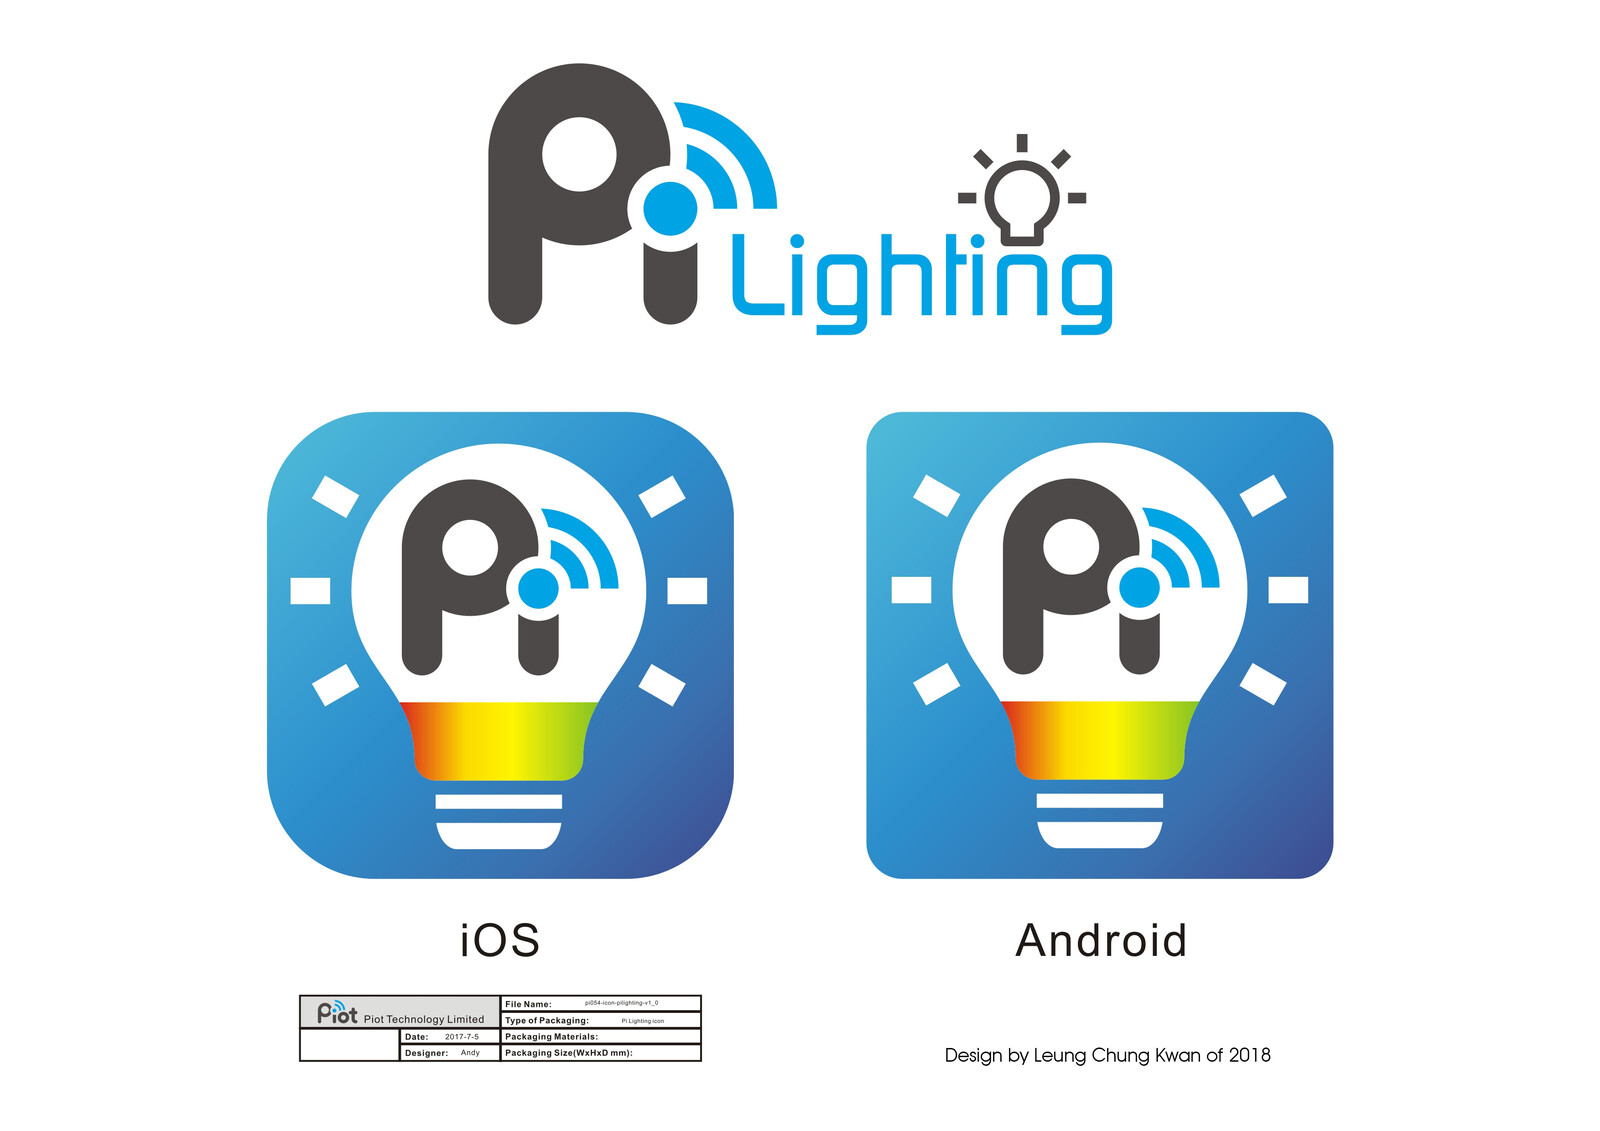 💎 App Icon | Design by Leung Chung Kwan on 2018 💎
App Name︰Pilighting | Client︰Piot Technology Limited